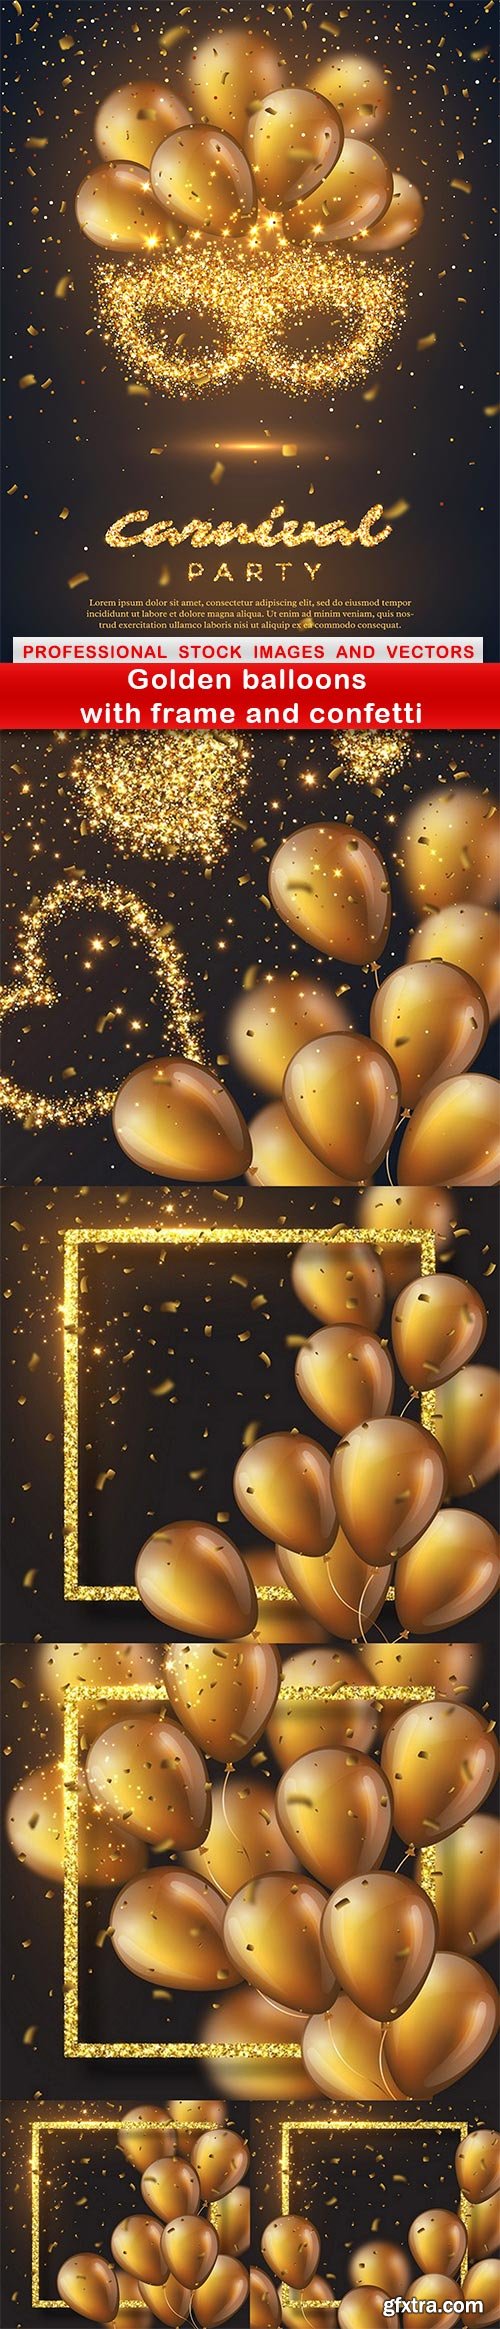 Golden balloons with frame and confetti - 6 EPS